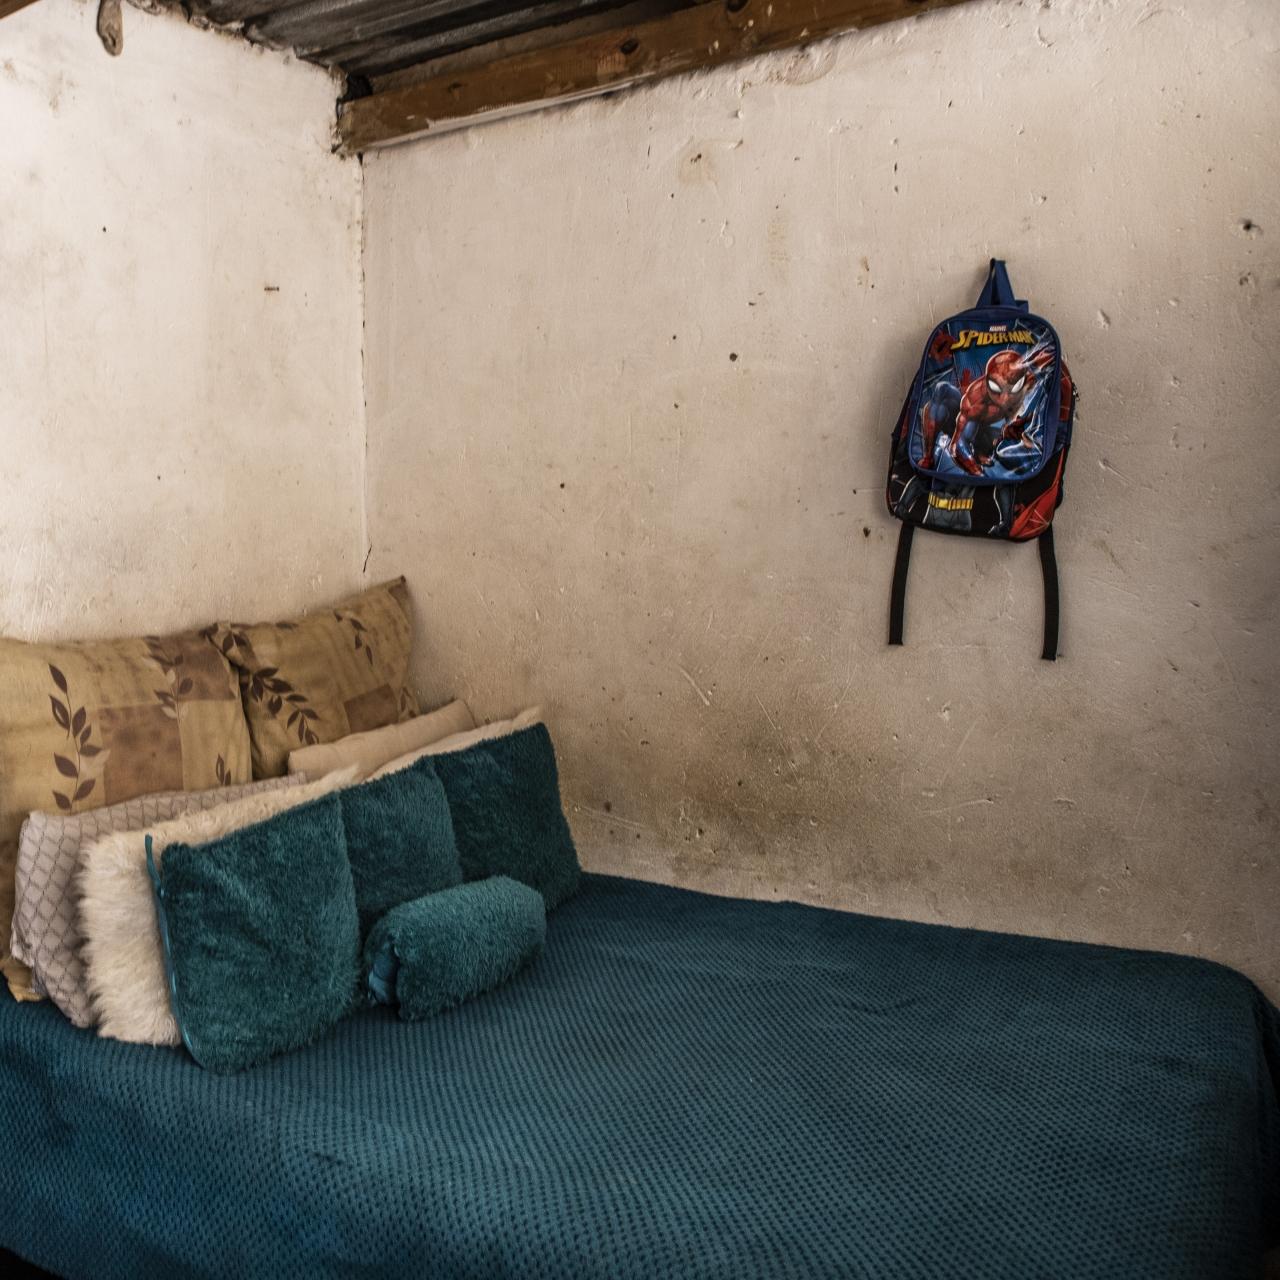 A small bedroom with rough, white walls and a bed with turquoise sheets. A Spiderman backpack hangs on the wall and large stereo sits atop a bedside table